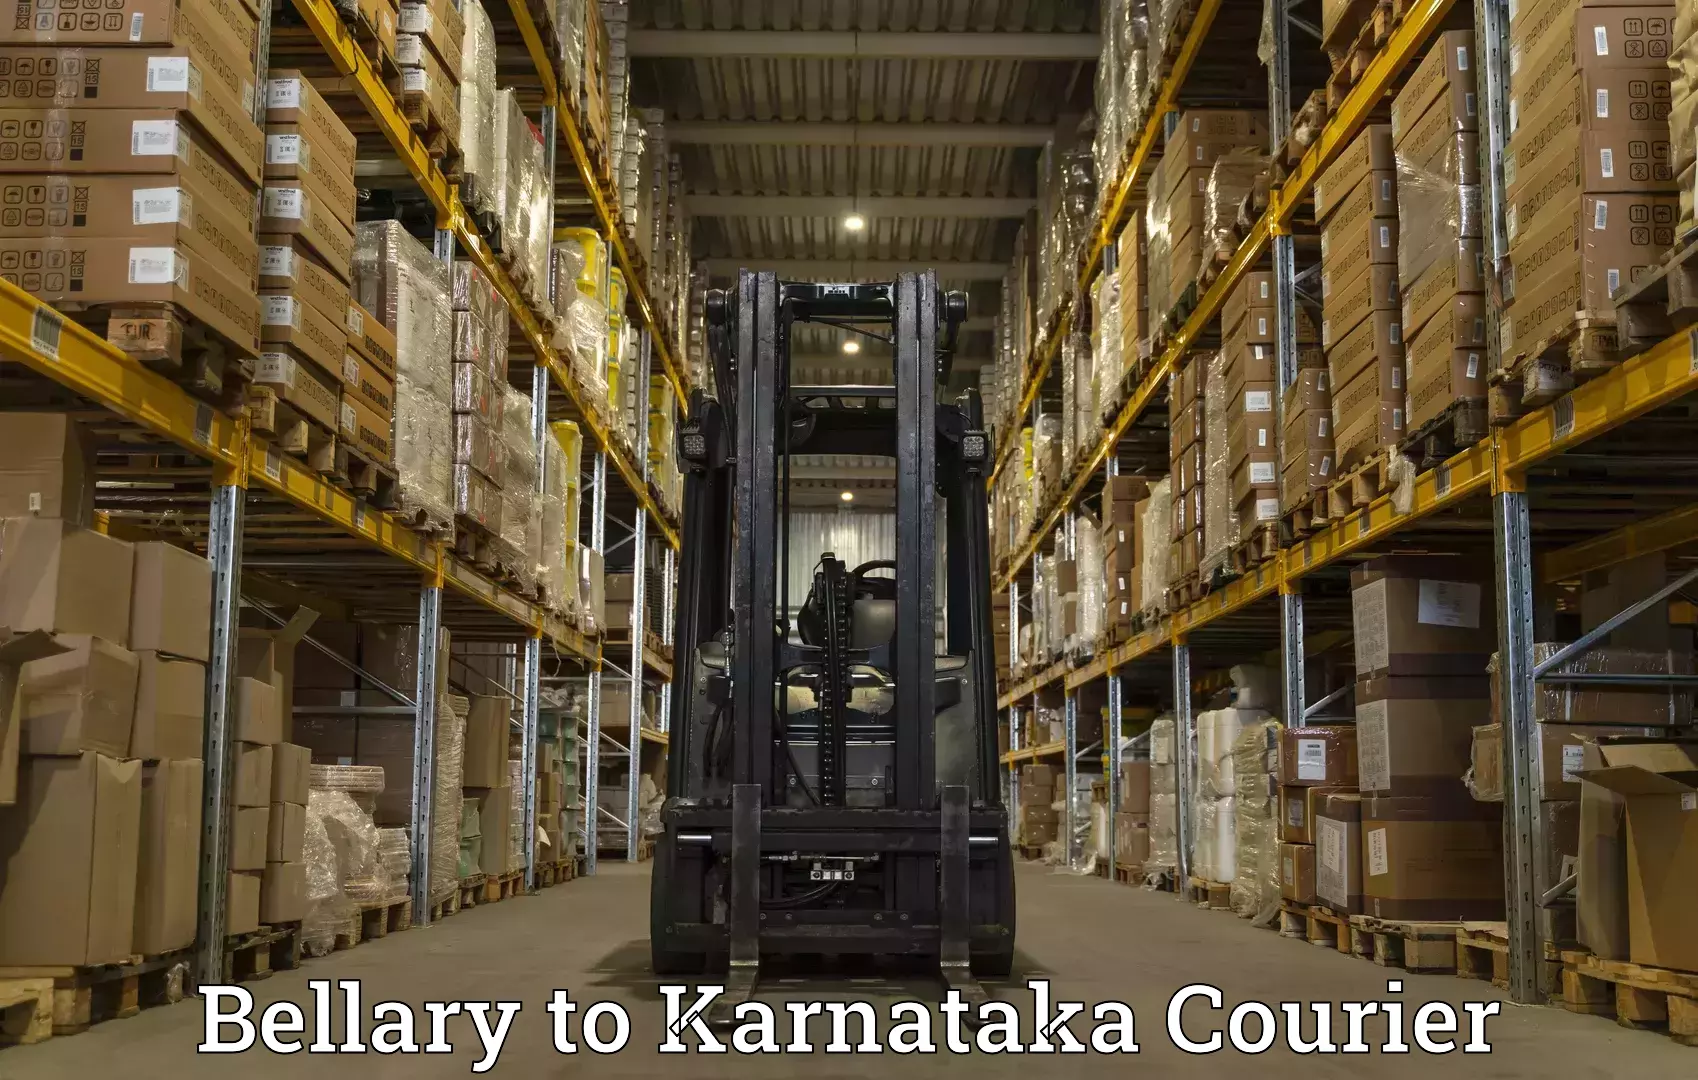 24/7 shipping services Bellary to Maddur